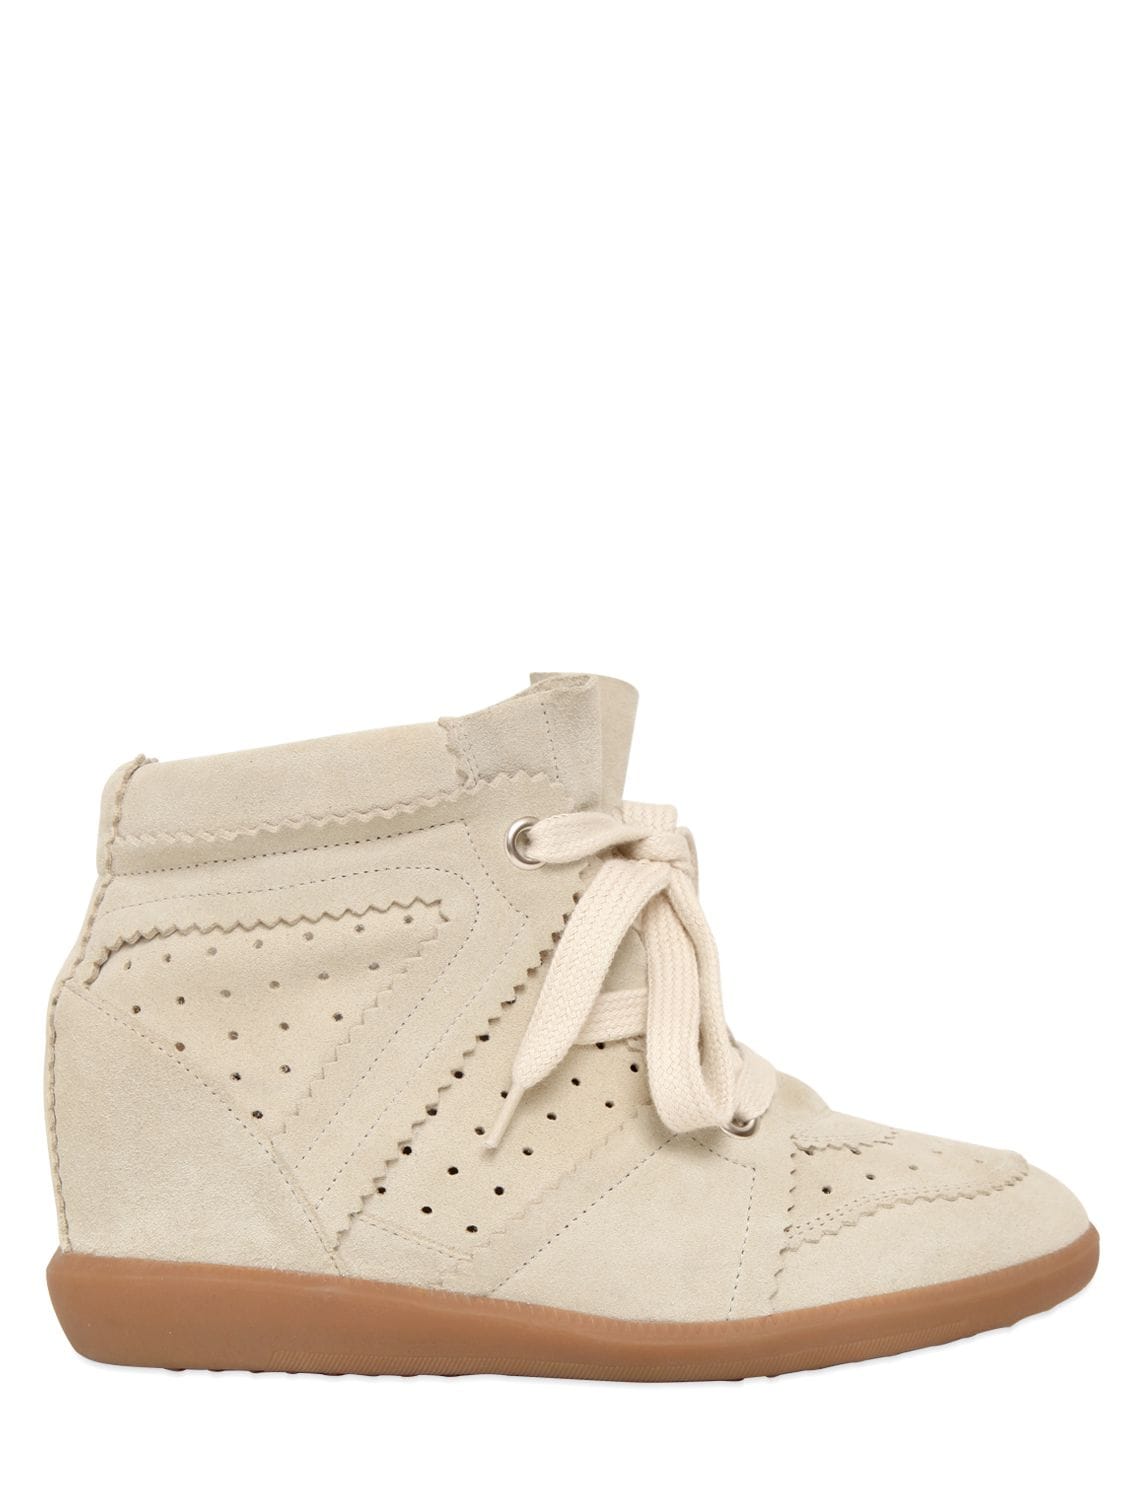 Isabel Marant 80mm Bobby Suede Wedge Sneakers In Chalk